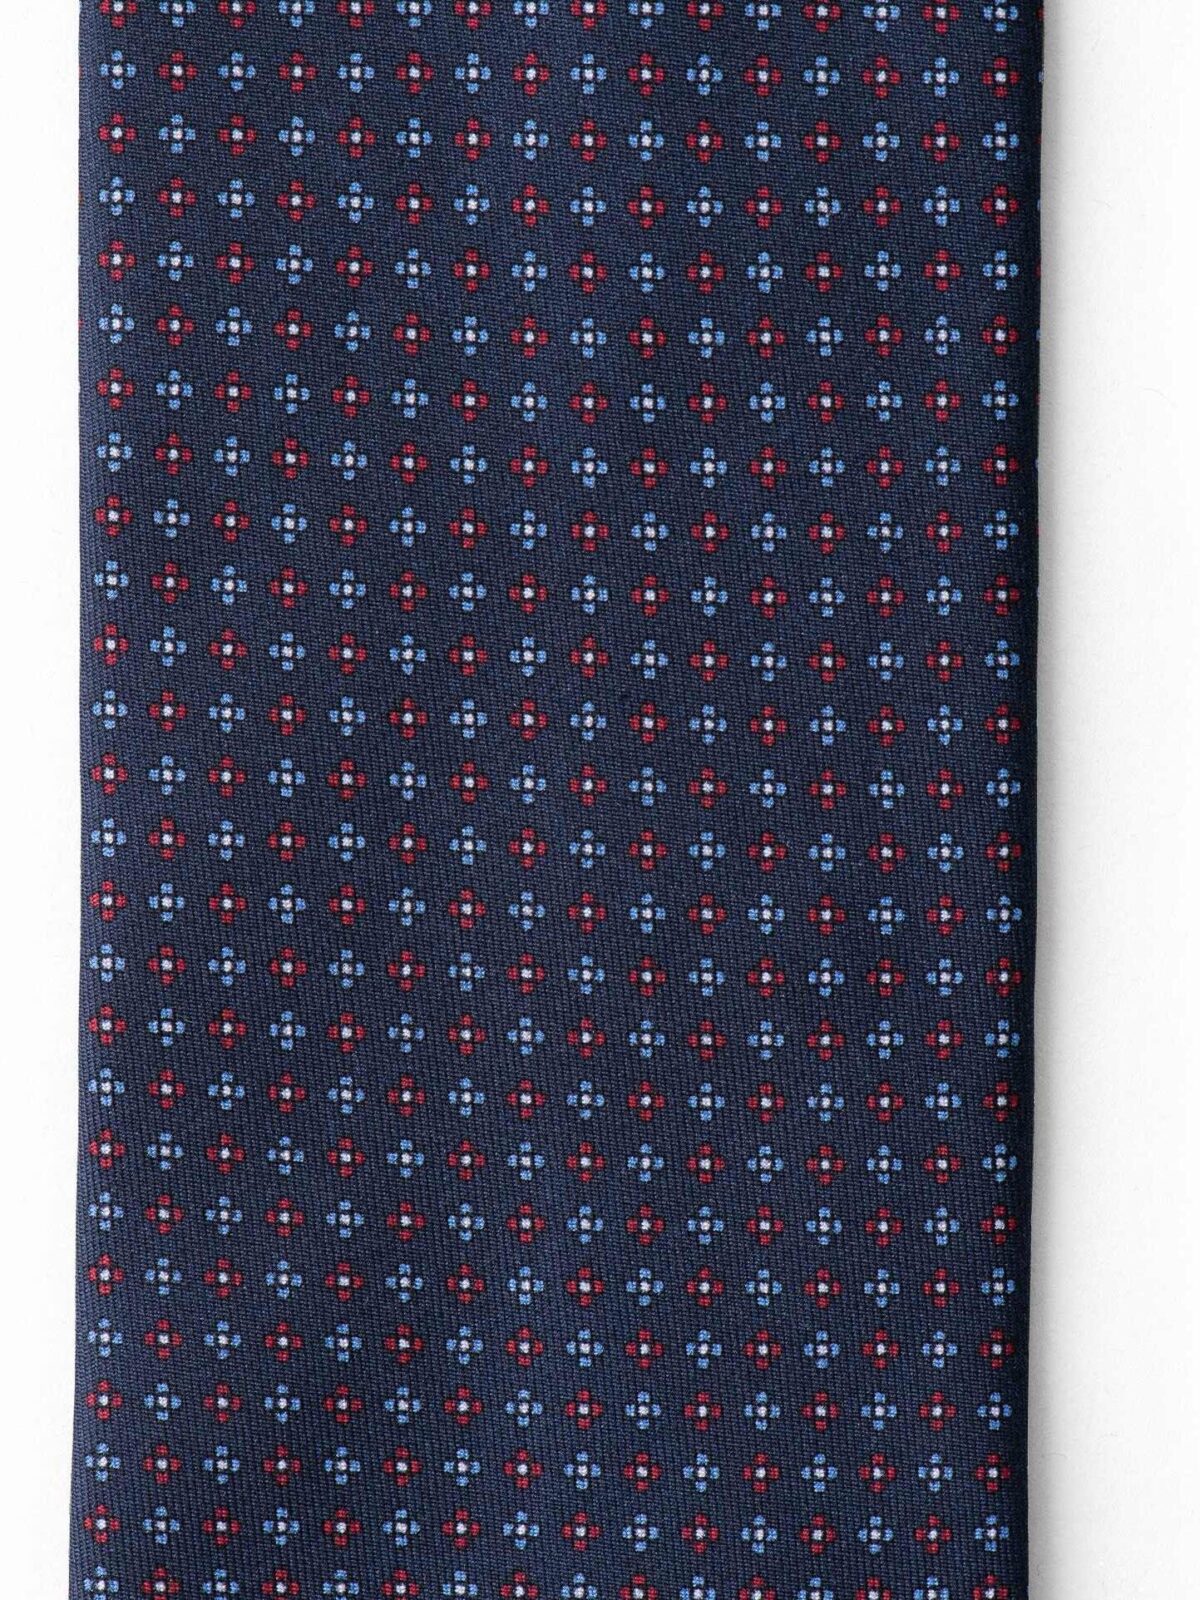 Navy Red and Light Blue Small Foulard Silk Tie